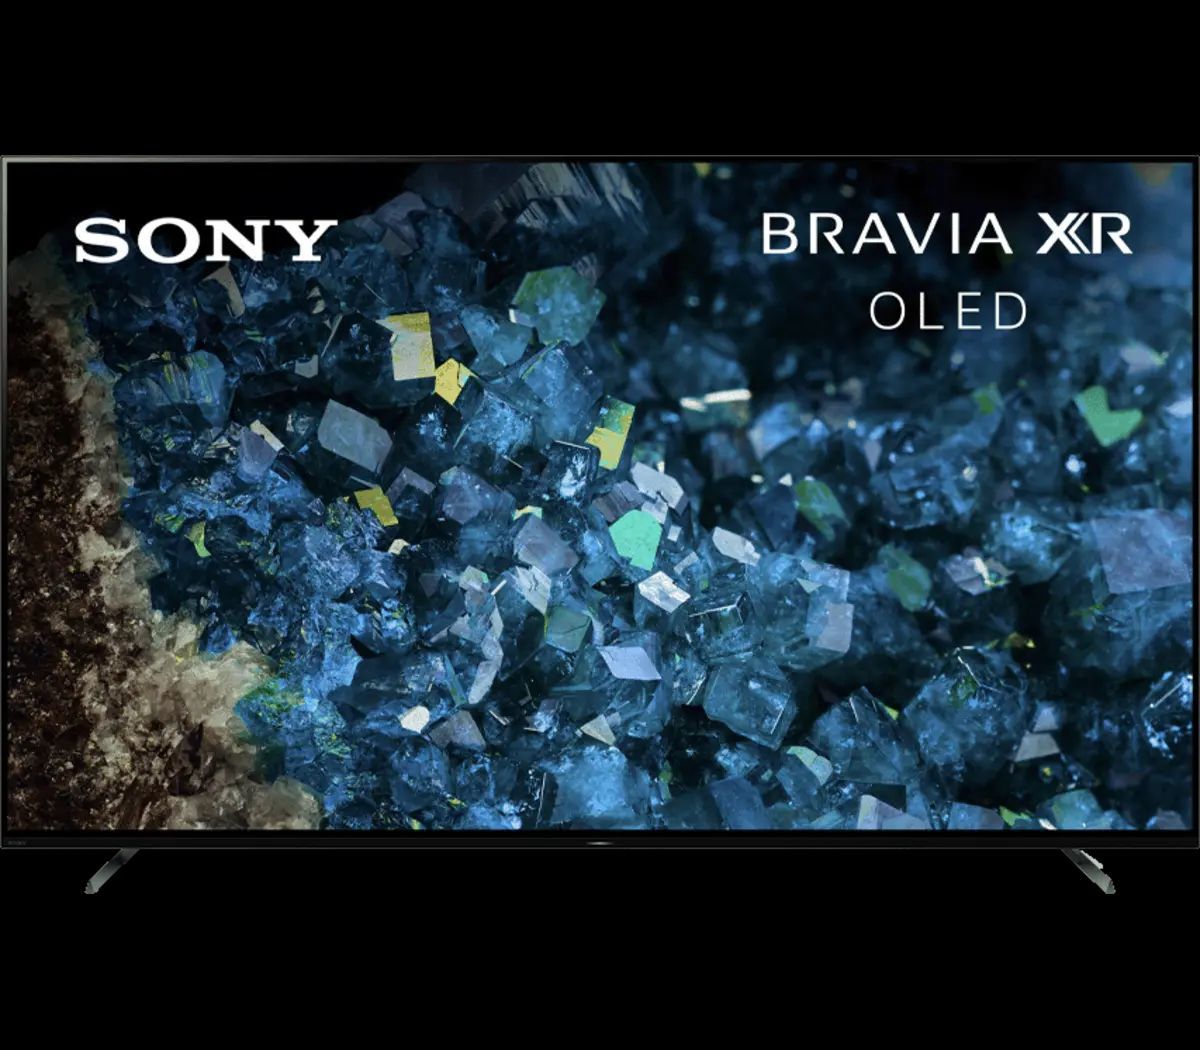 Sony BRAVIA XR A80L 65-inch Smart OLED TV.